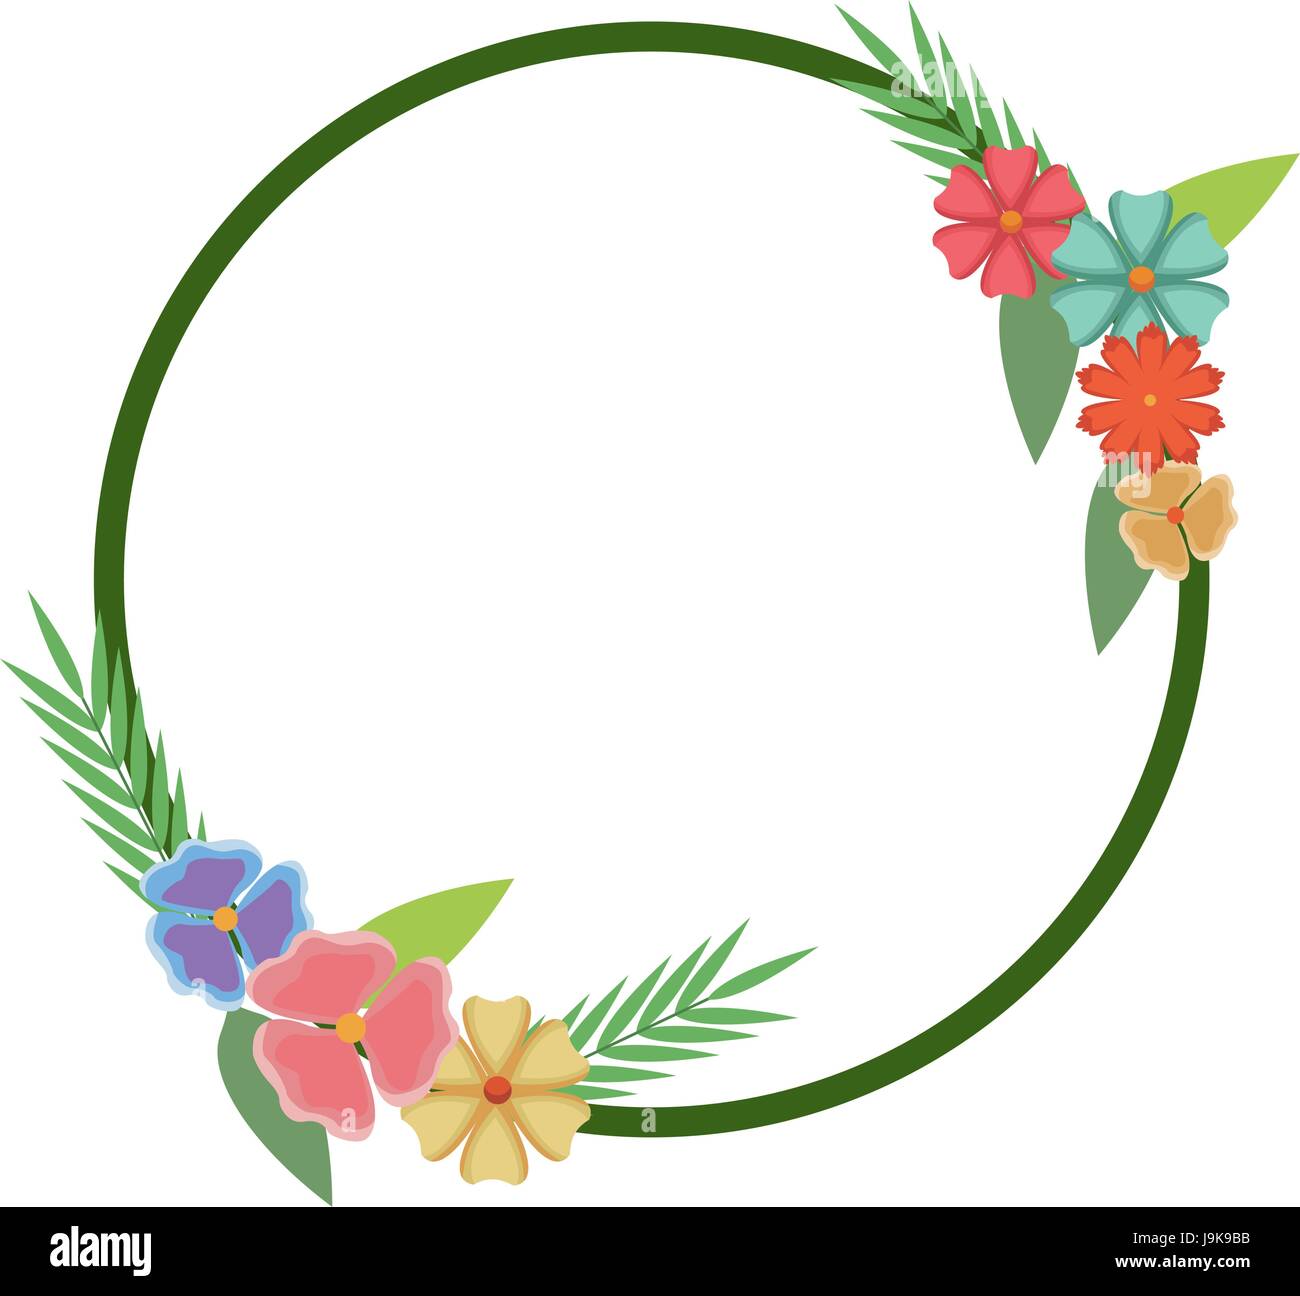 floral frame round flowers natural decoration Stock Vector